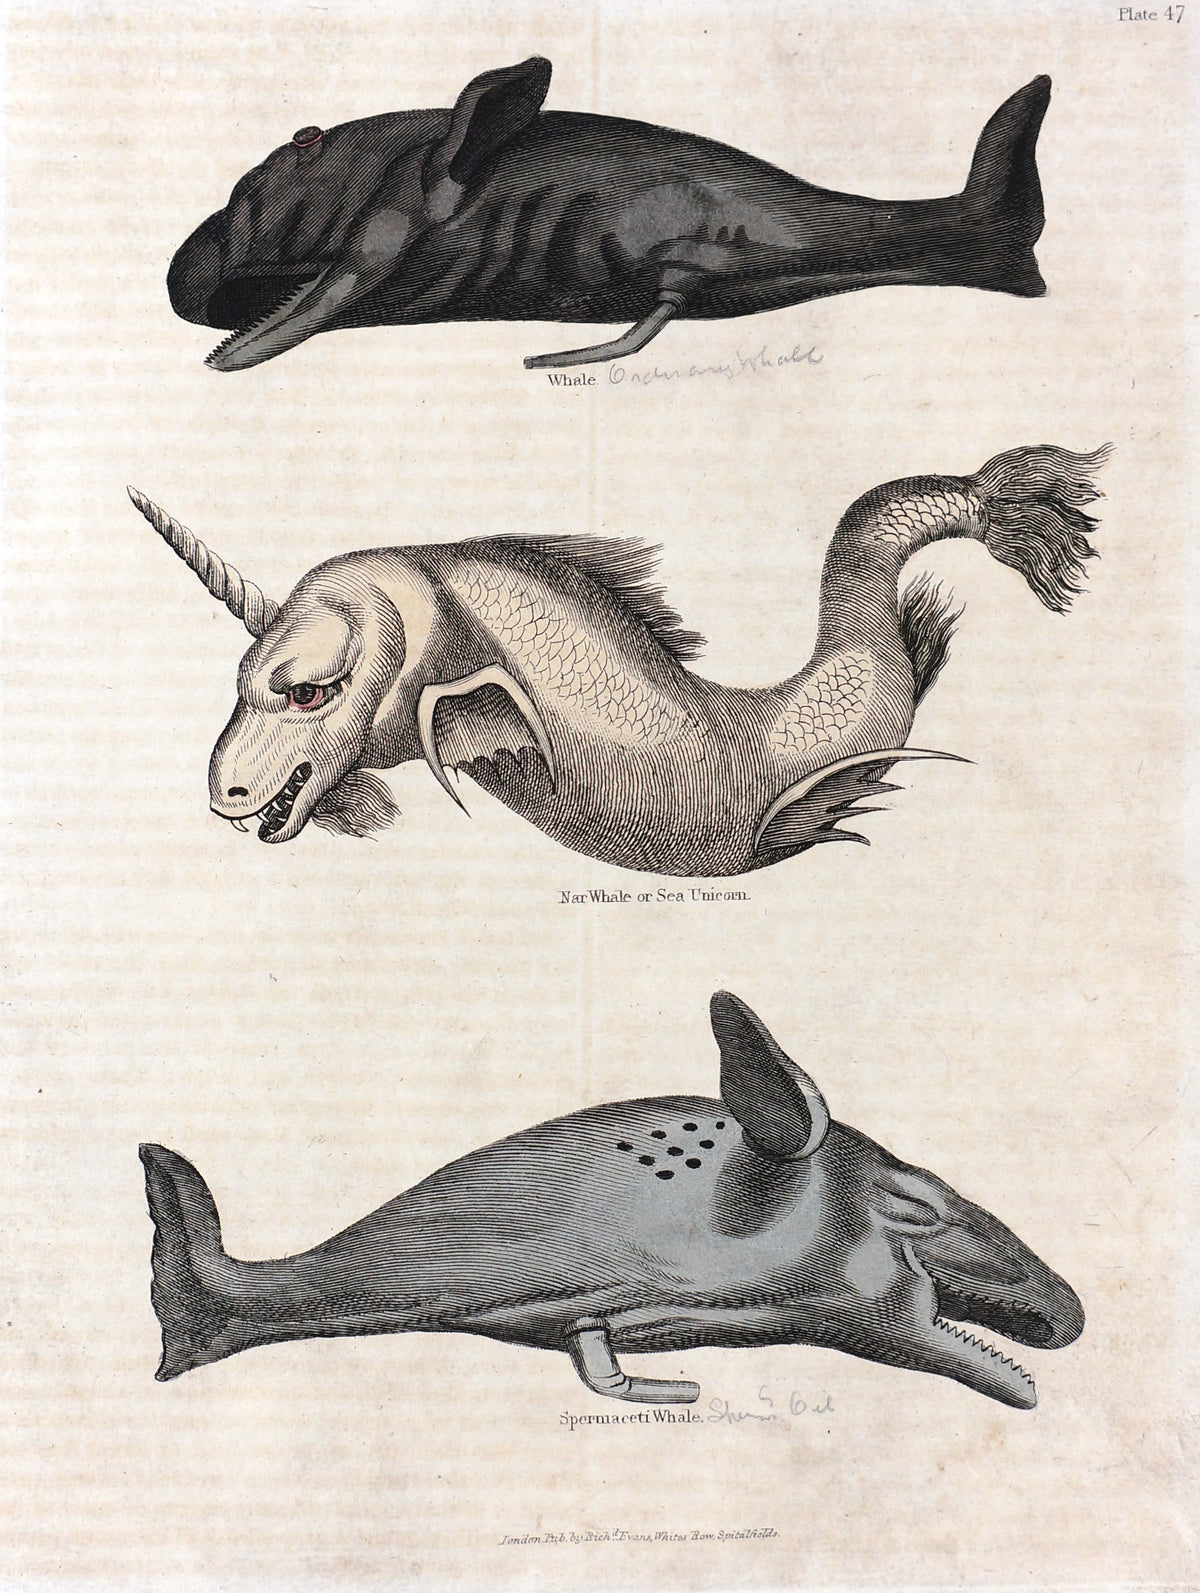 Sperm Whale, Sea Unicorn Hand colored Engraving - Authentic Vintage Poster